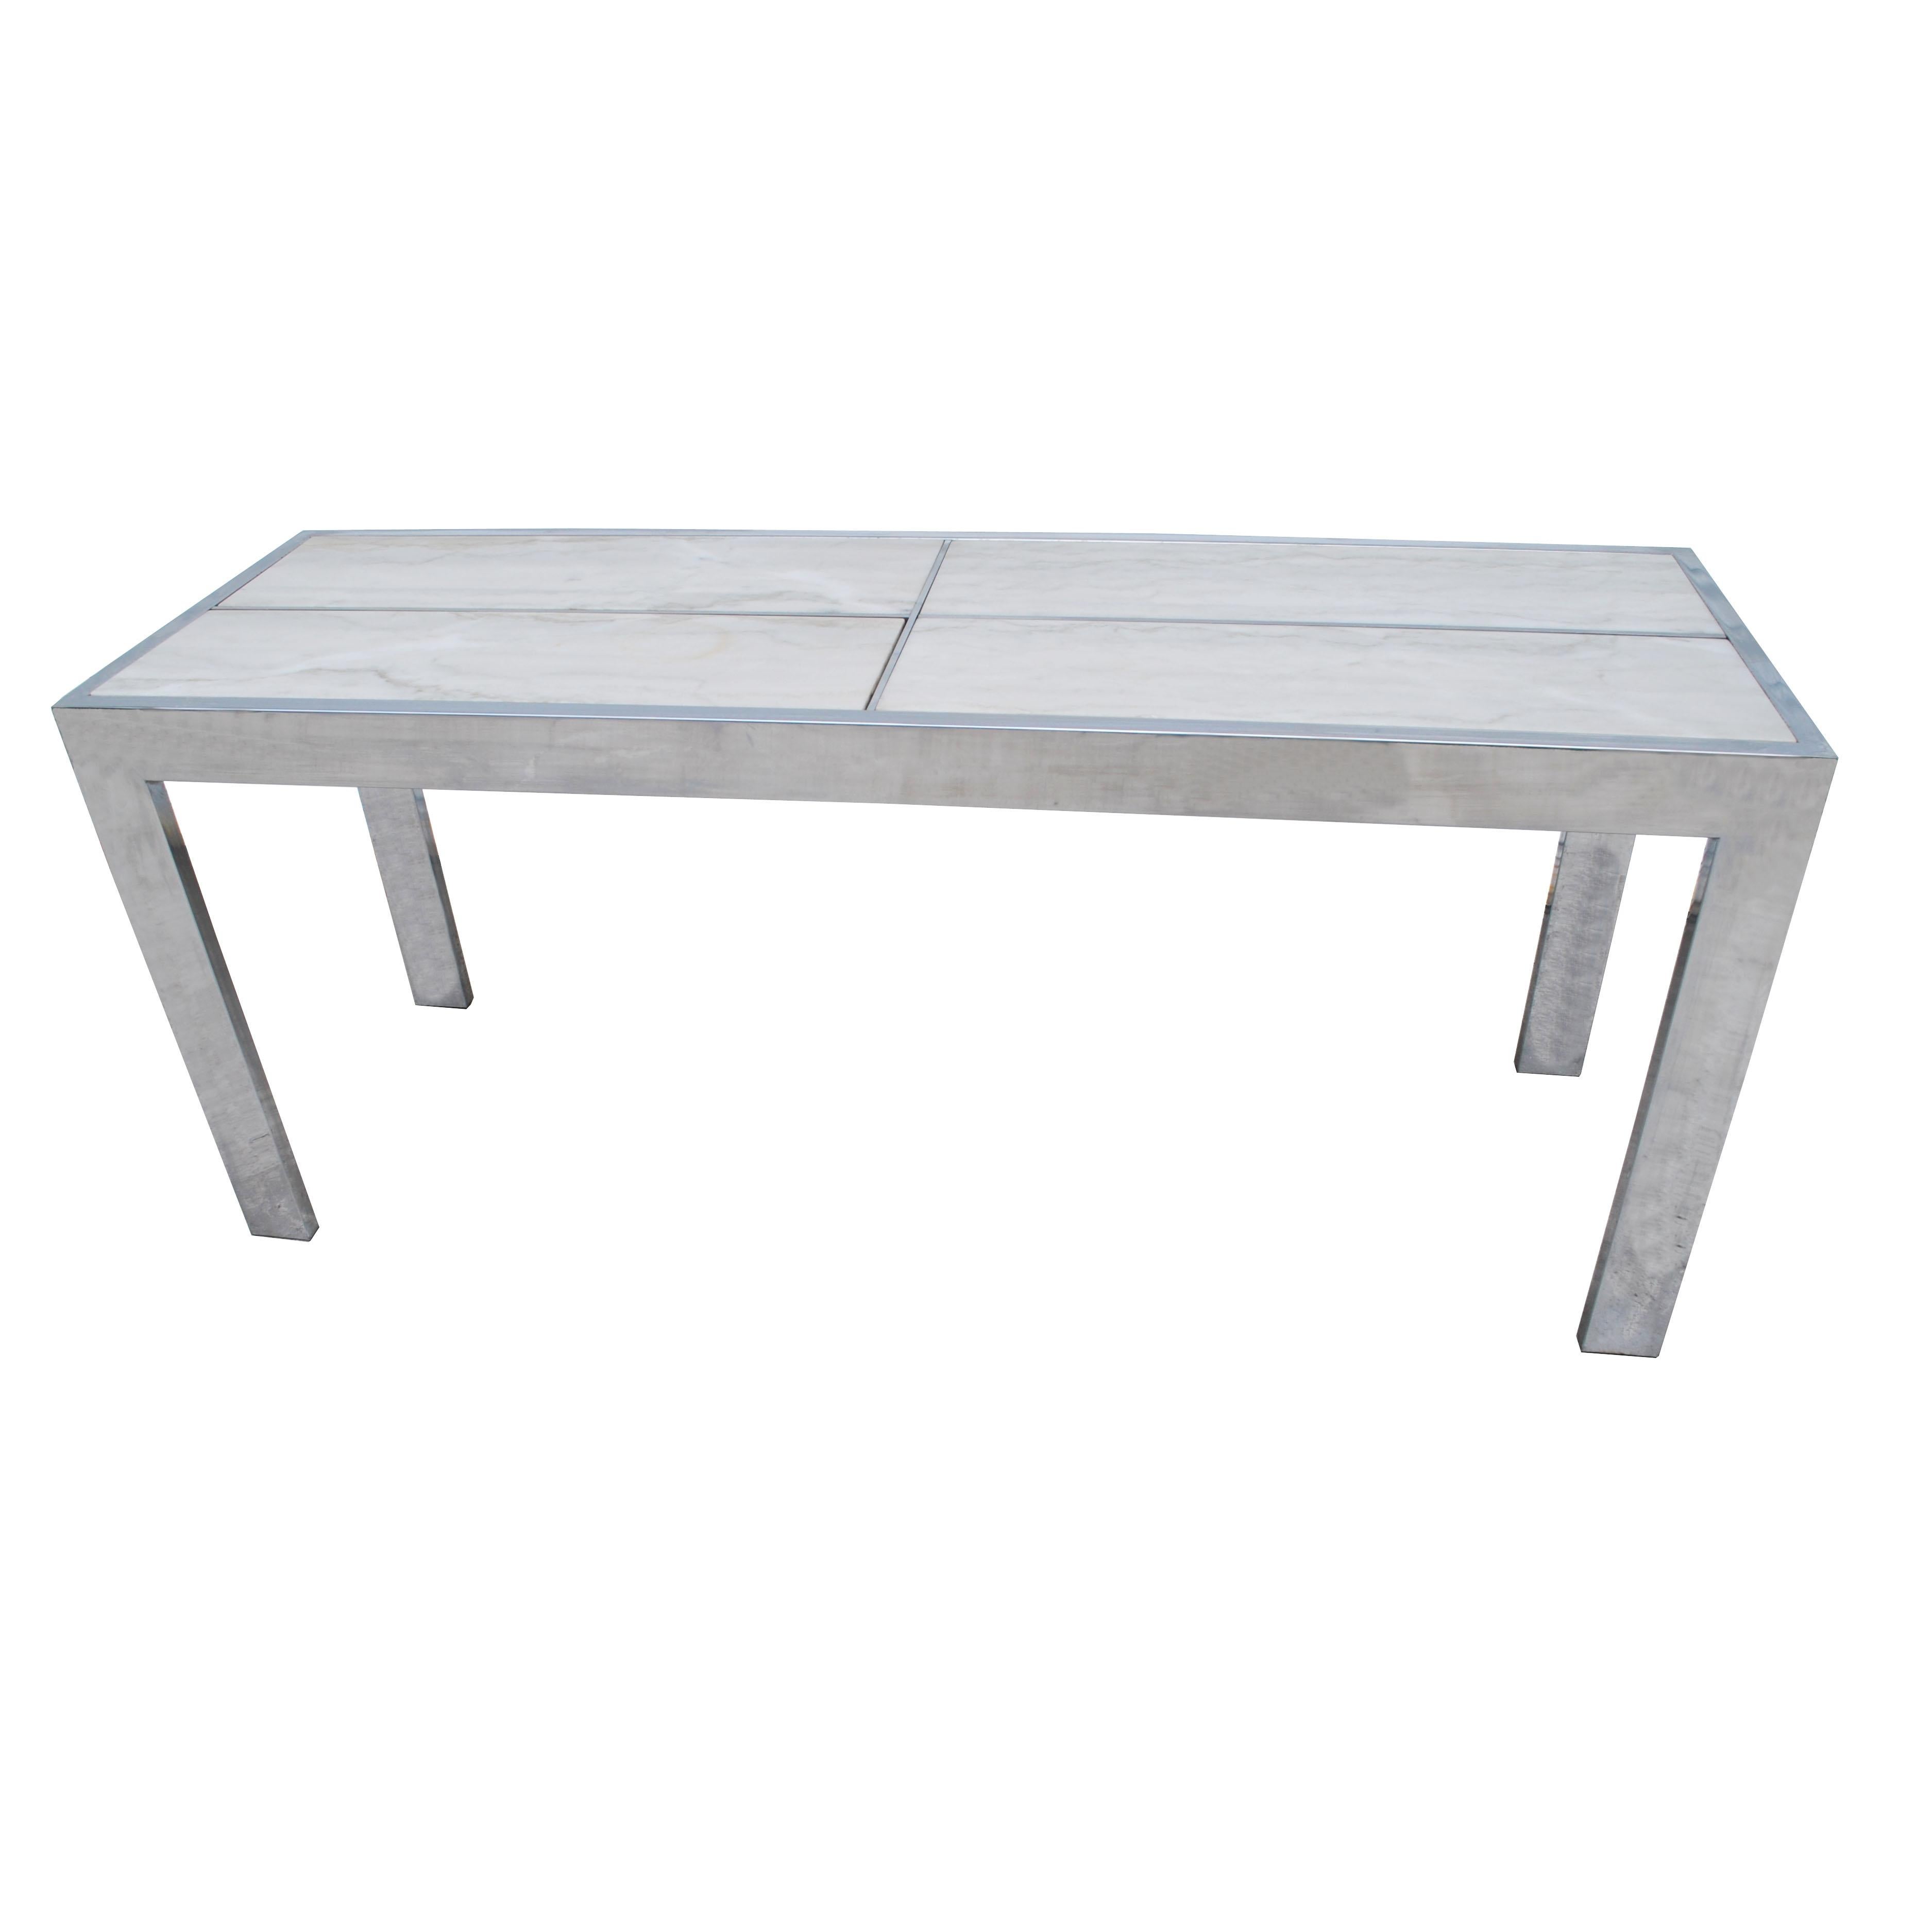 6-foot midcentury Baughman style console table with a chrome frame and Carrara marble inlays.

 